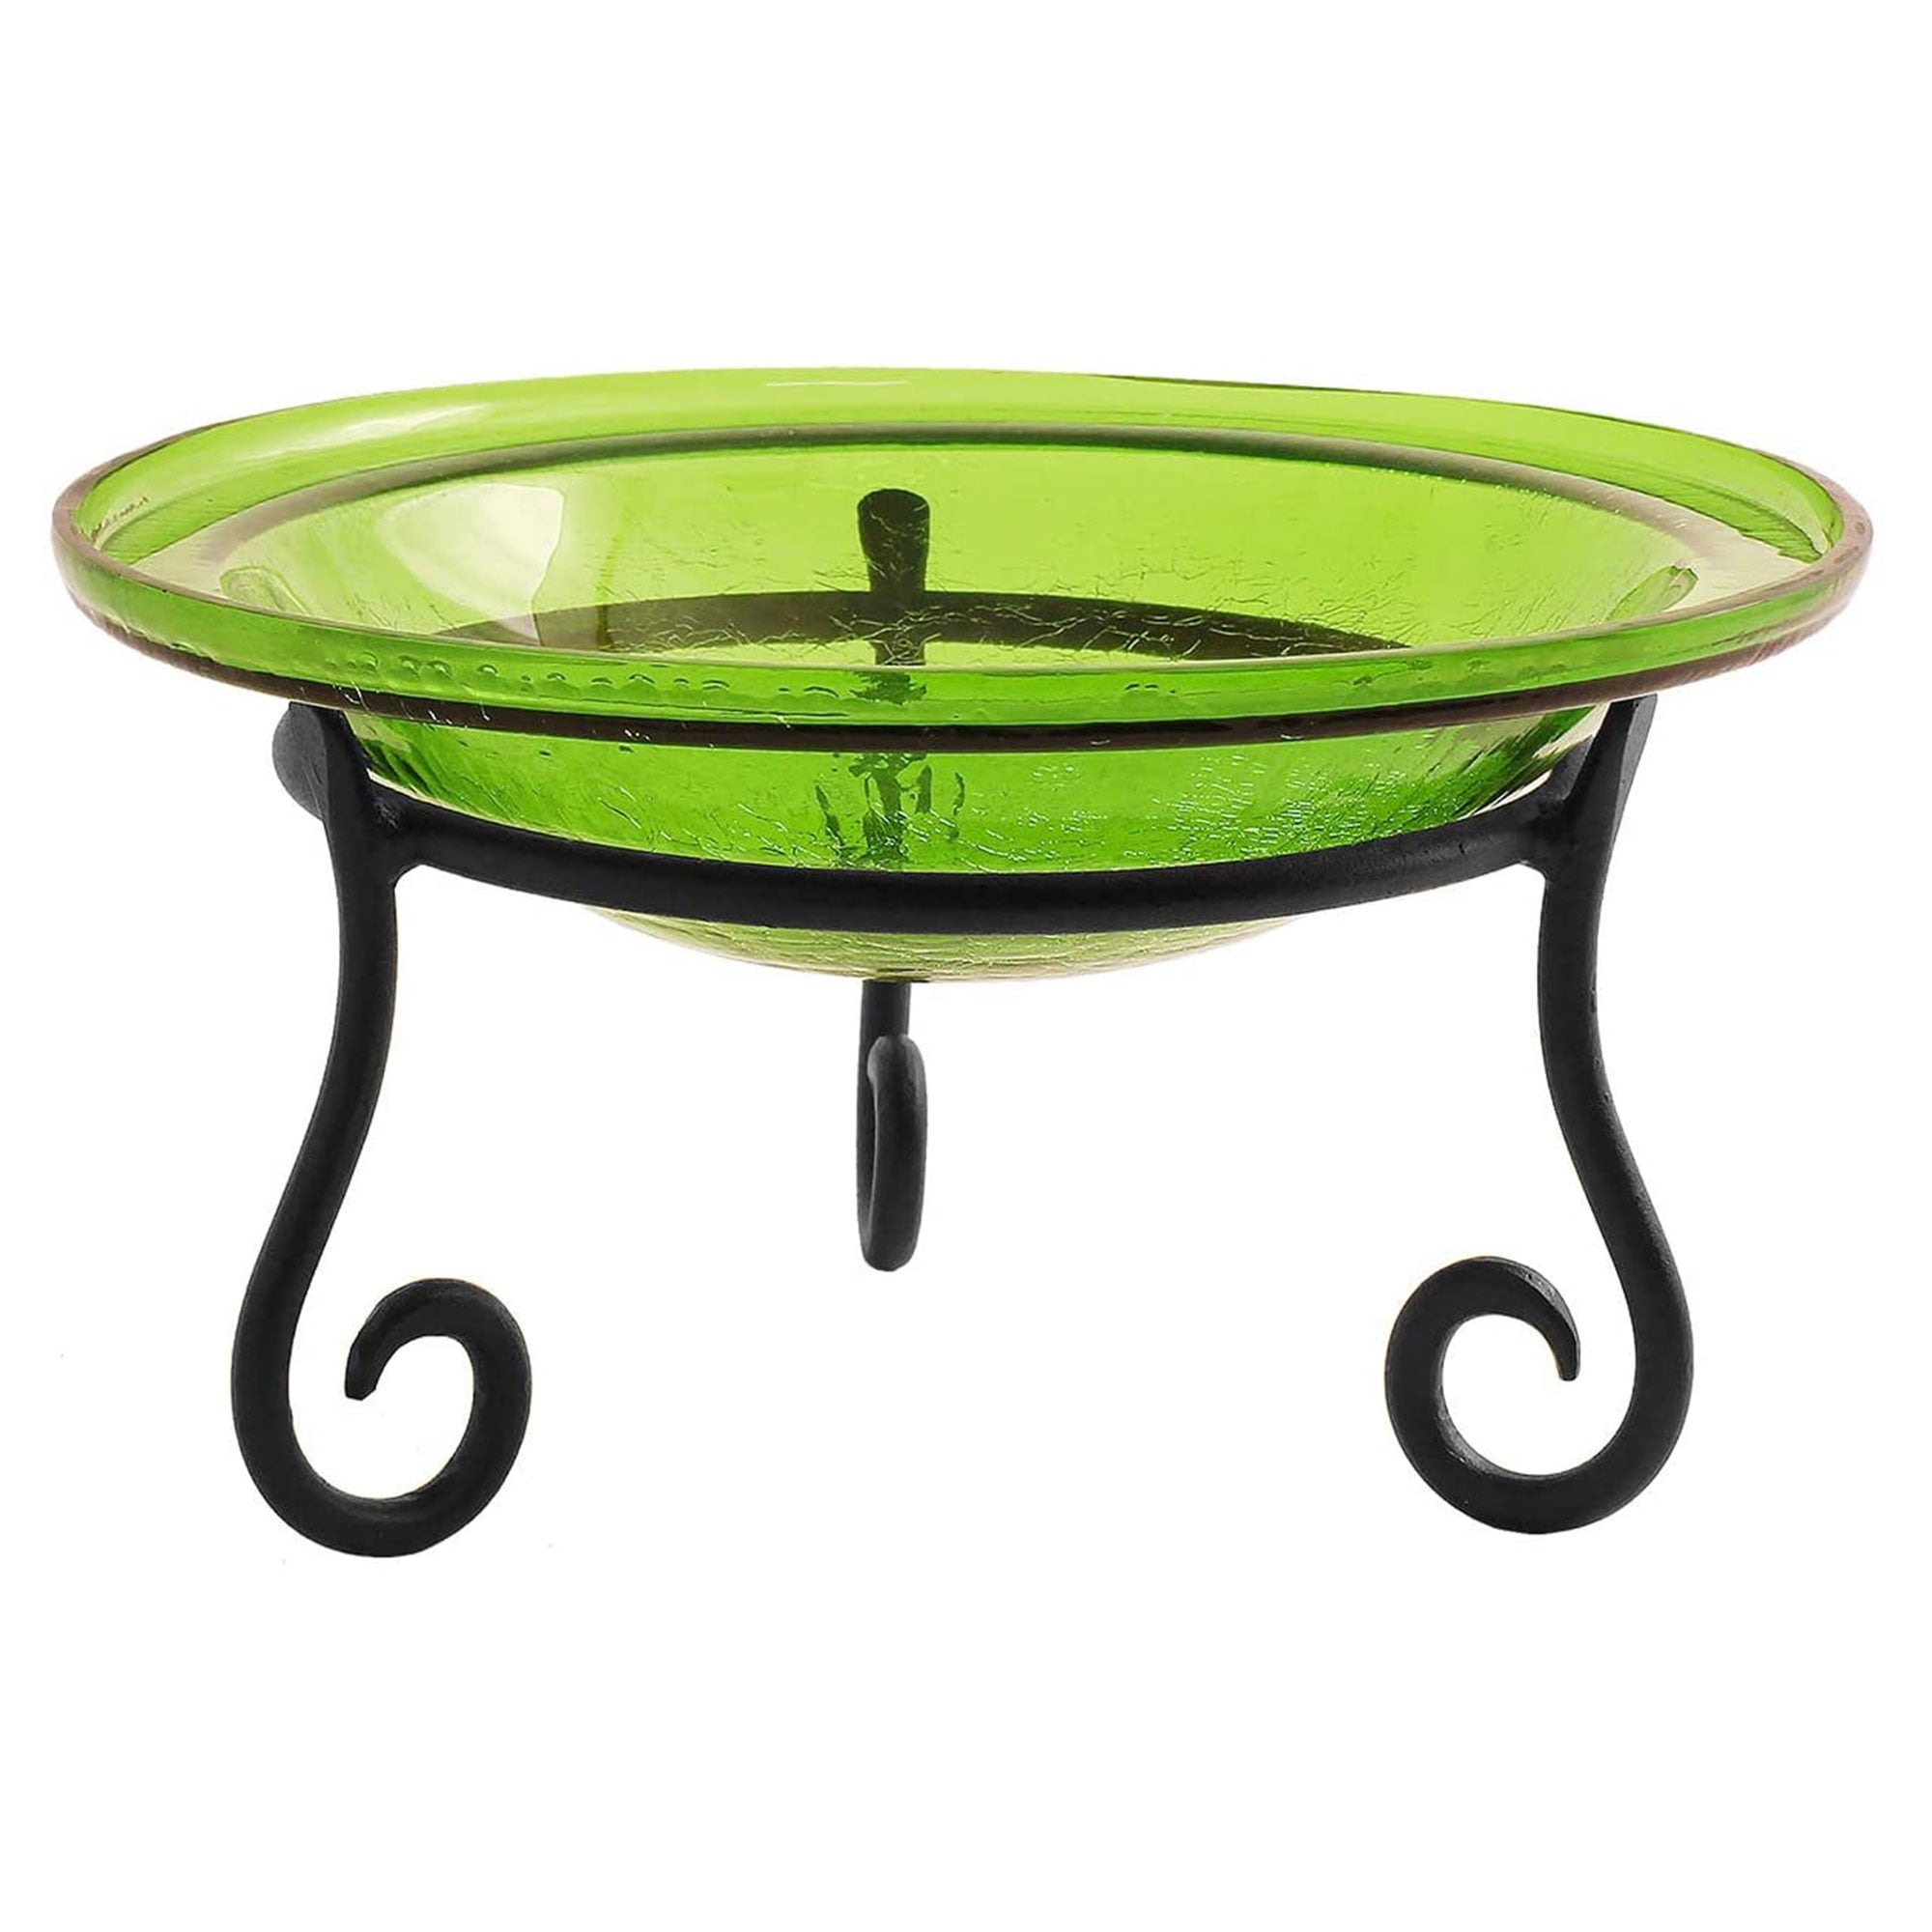 Picture of Achla CGB-05FG-S1 12 in. Fern Green Crackle Birdbath with Short Stand